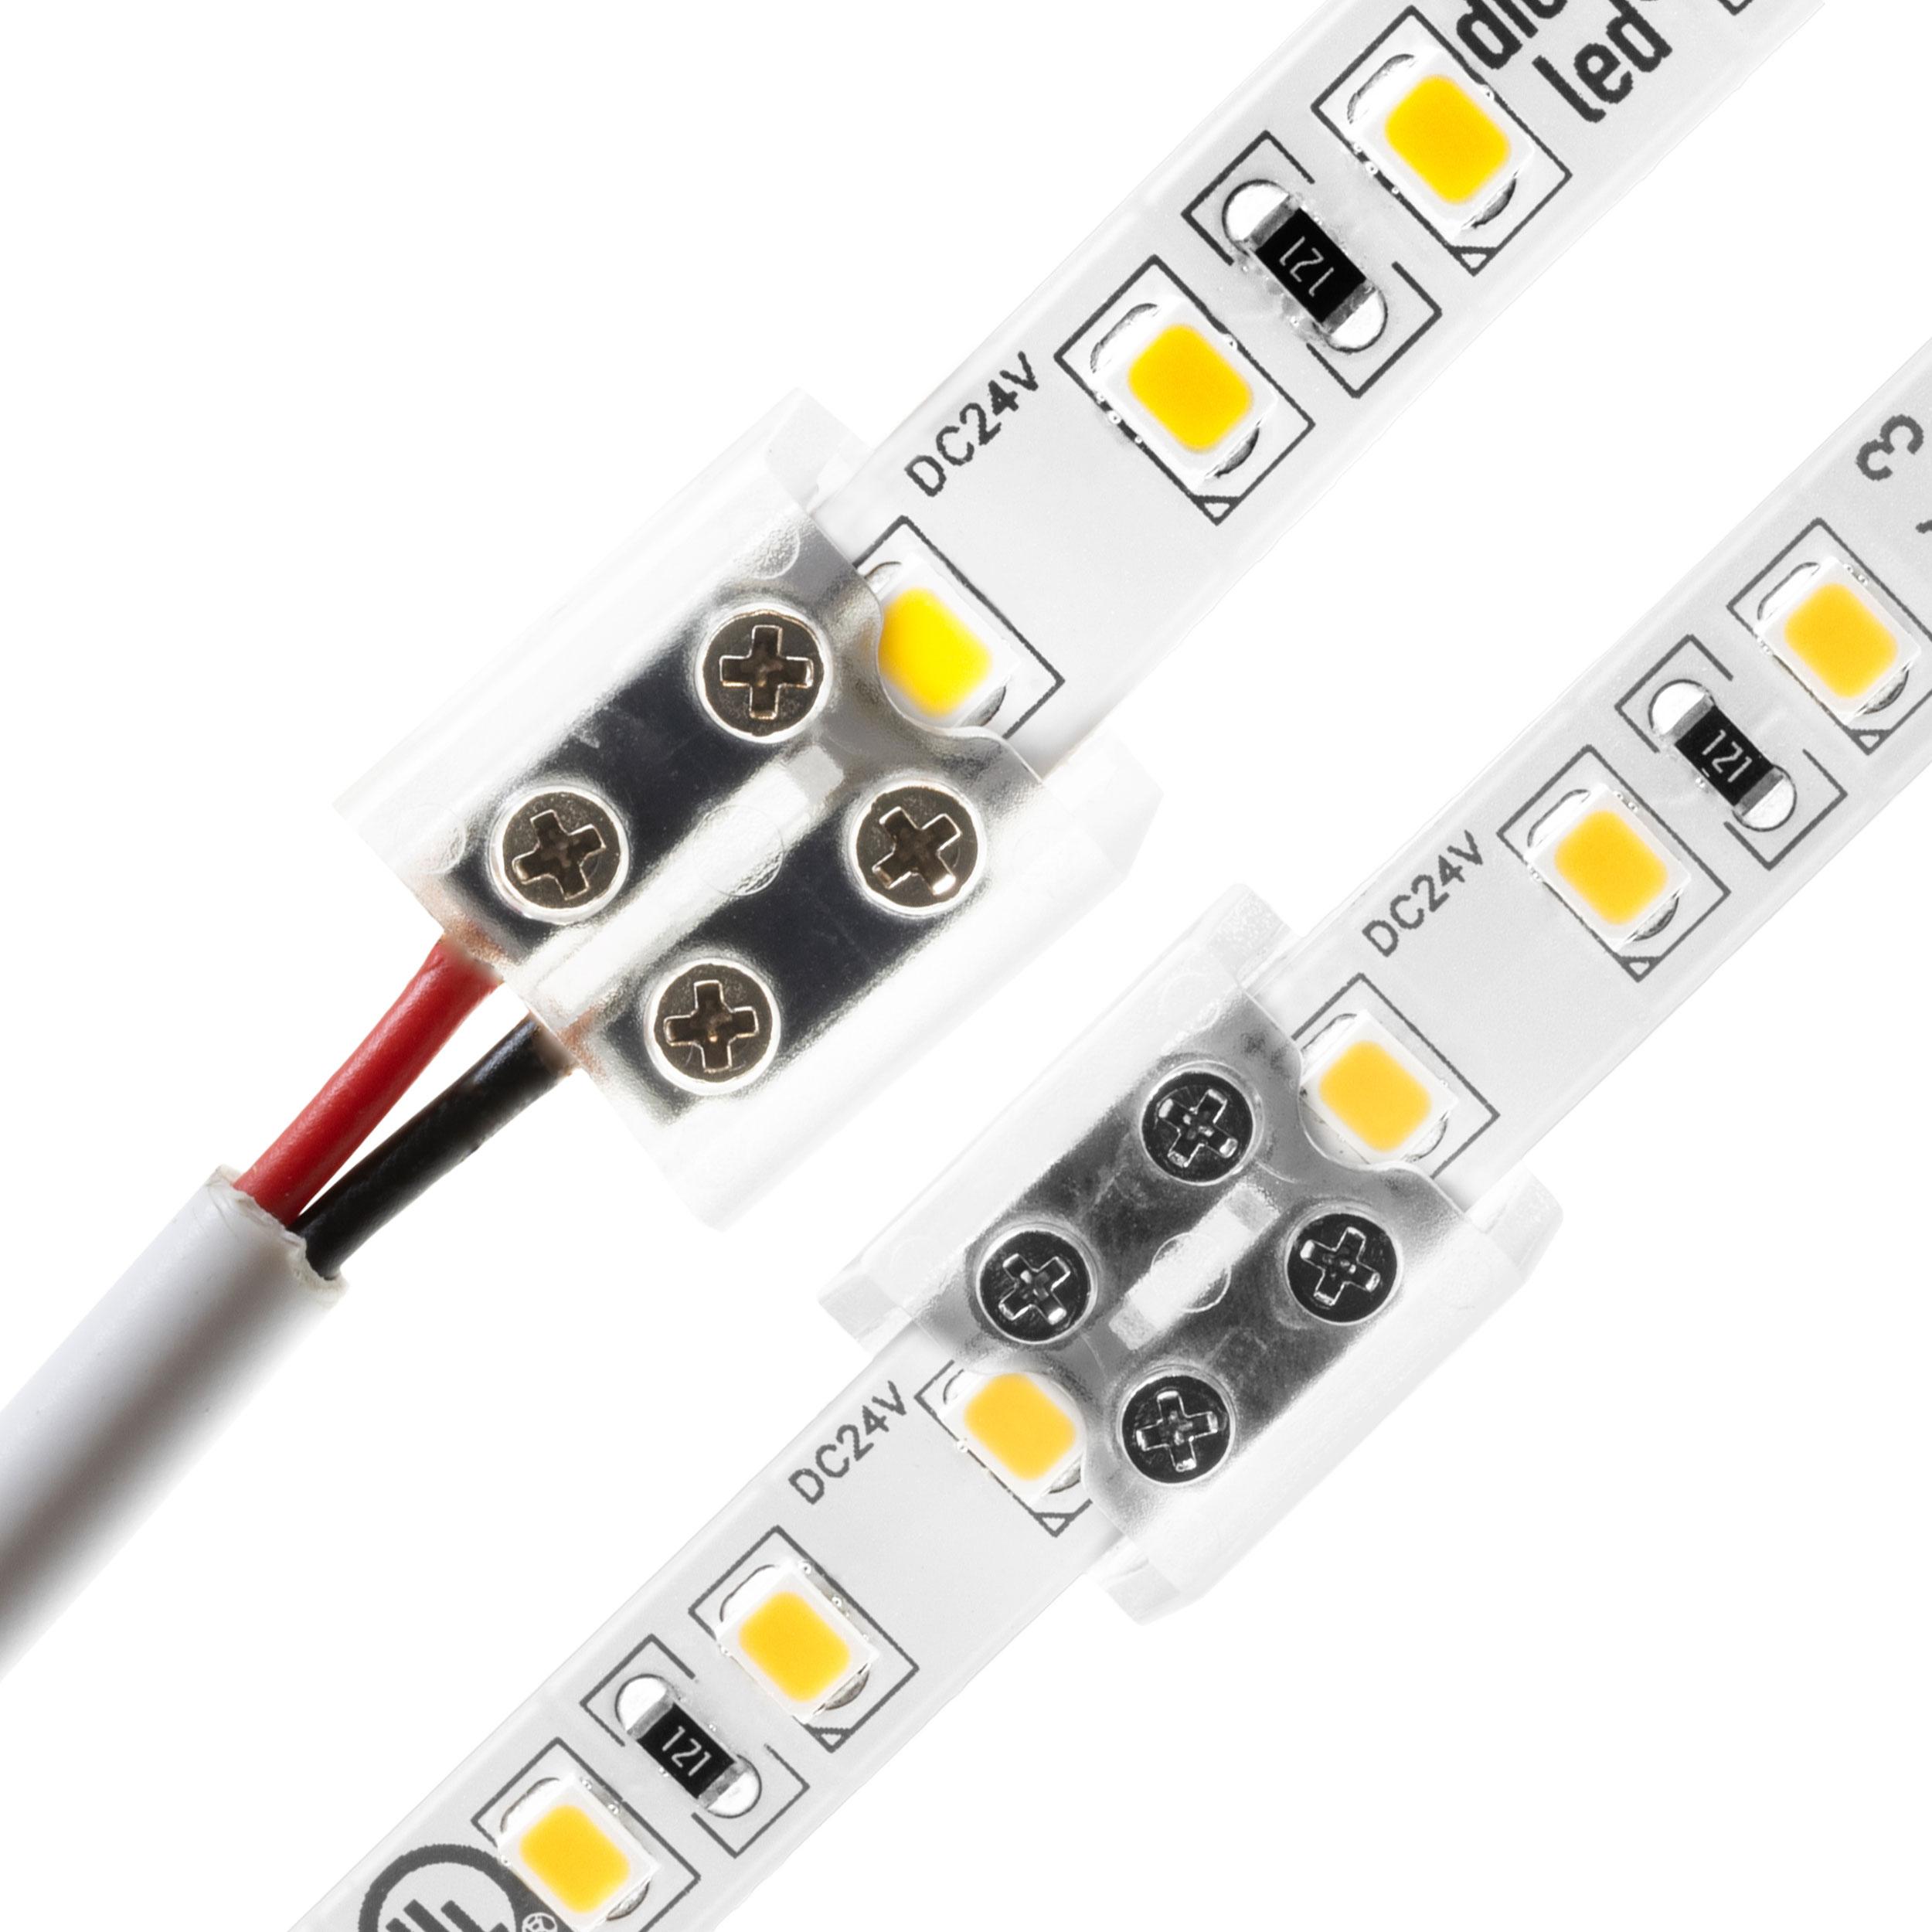 47pcs CH2 Quick Wire Connector Terminal Block Spring Connector LED Strip Light 